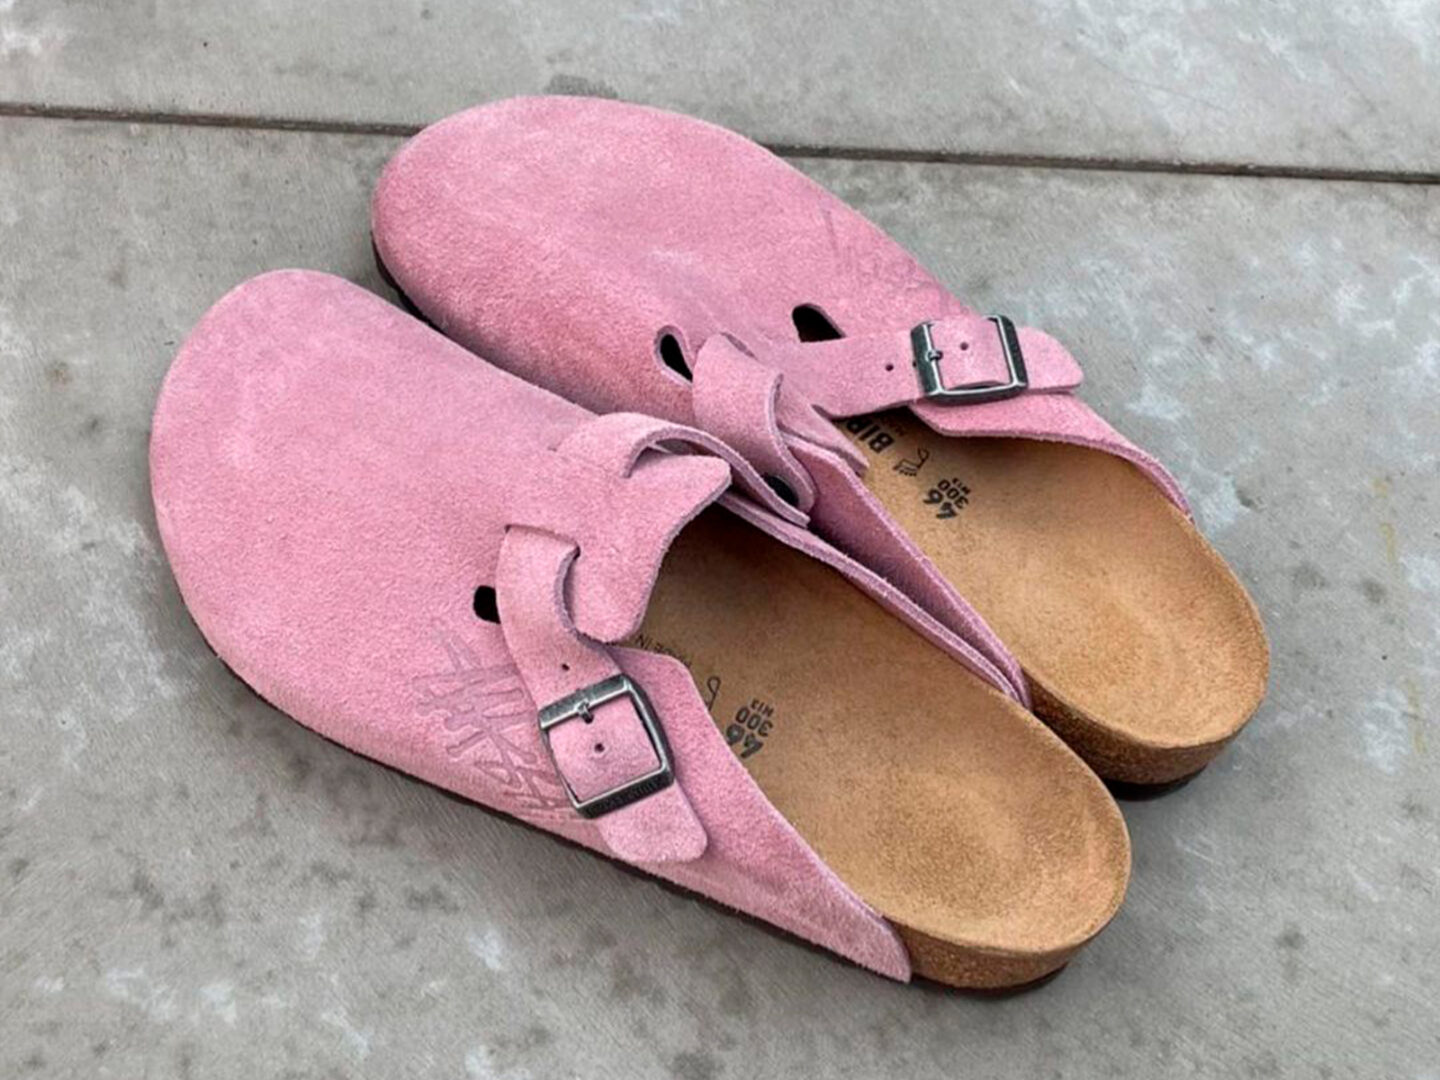 Stüssy and Birkenstock could be working on new silhouette